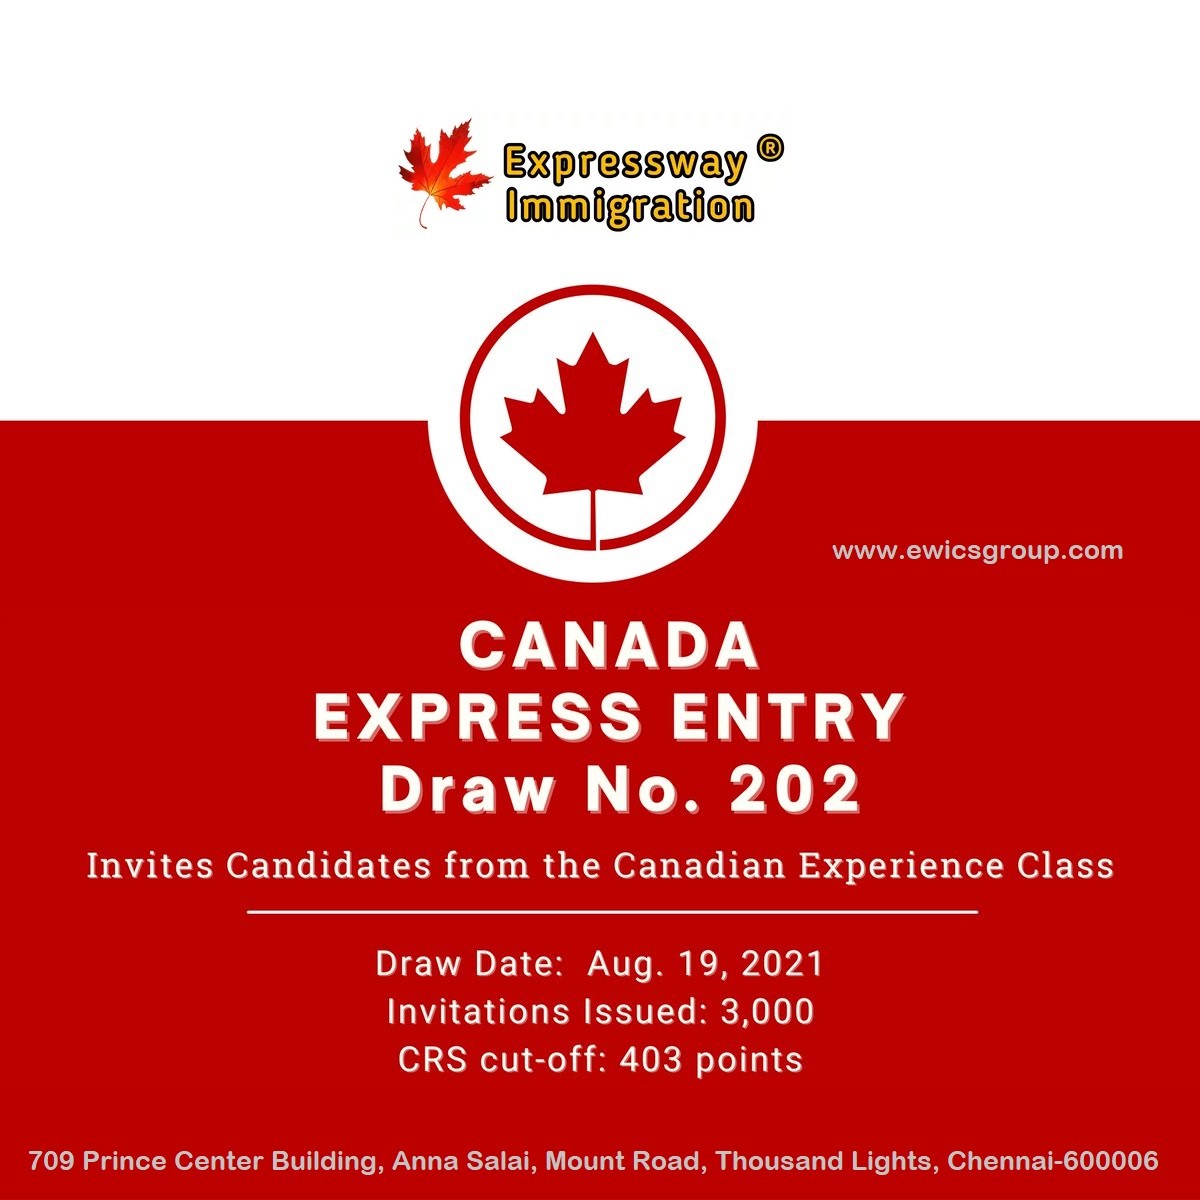 Latest Express Entry Draw #202